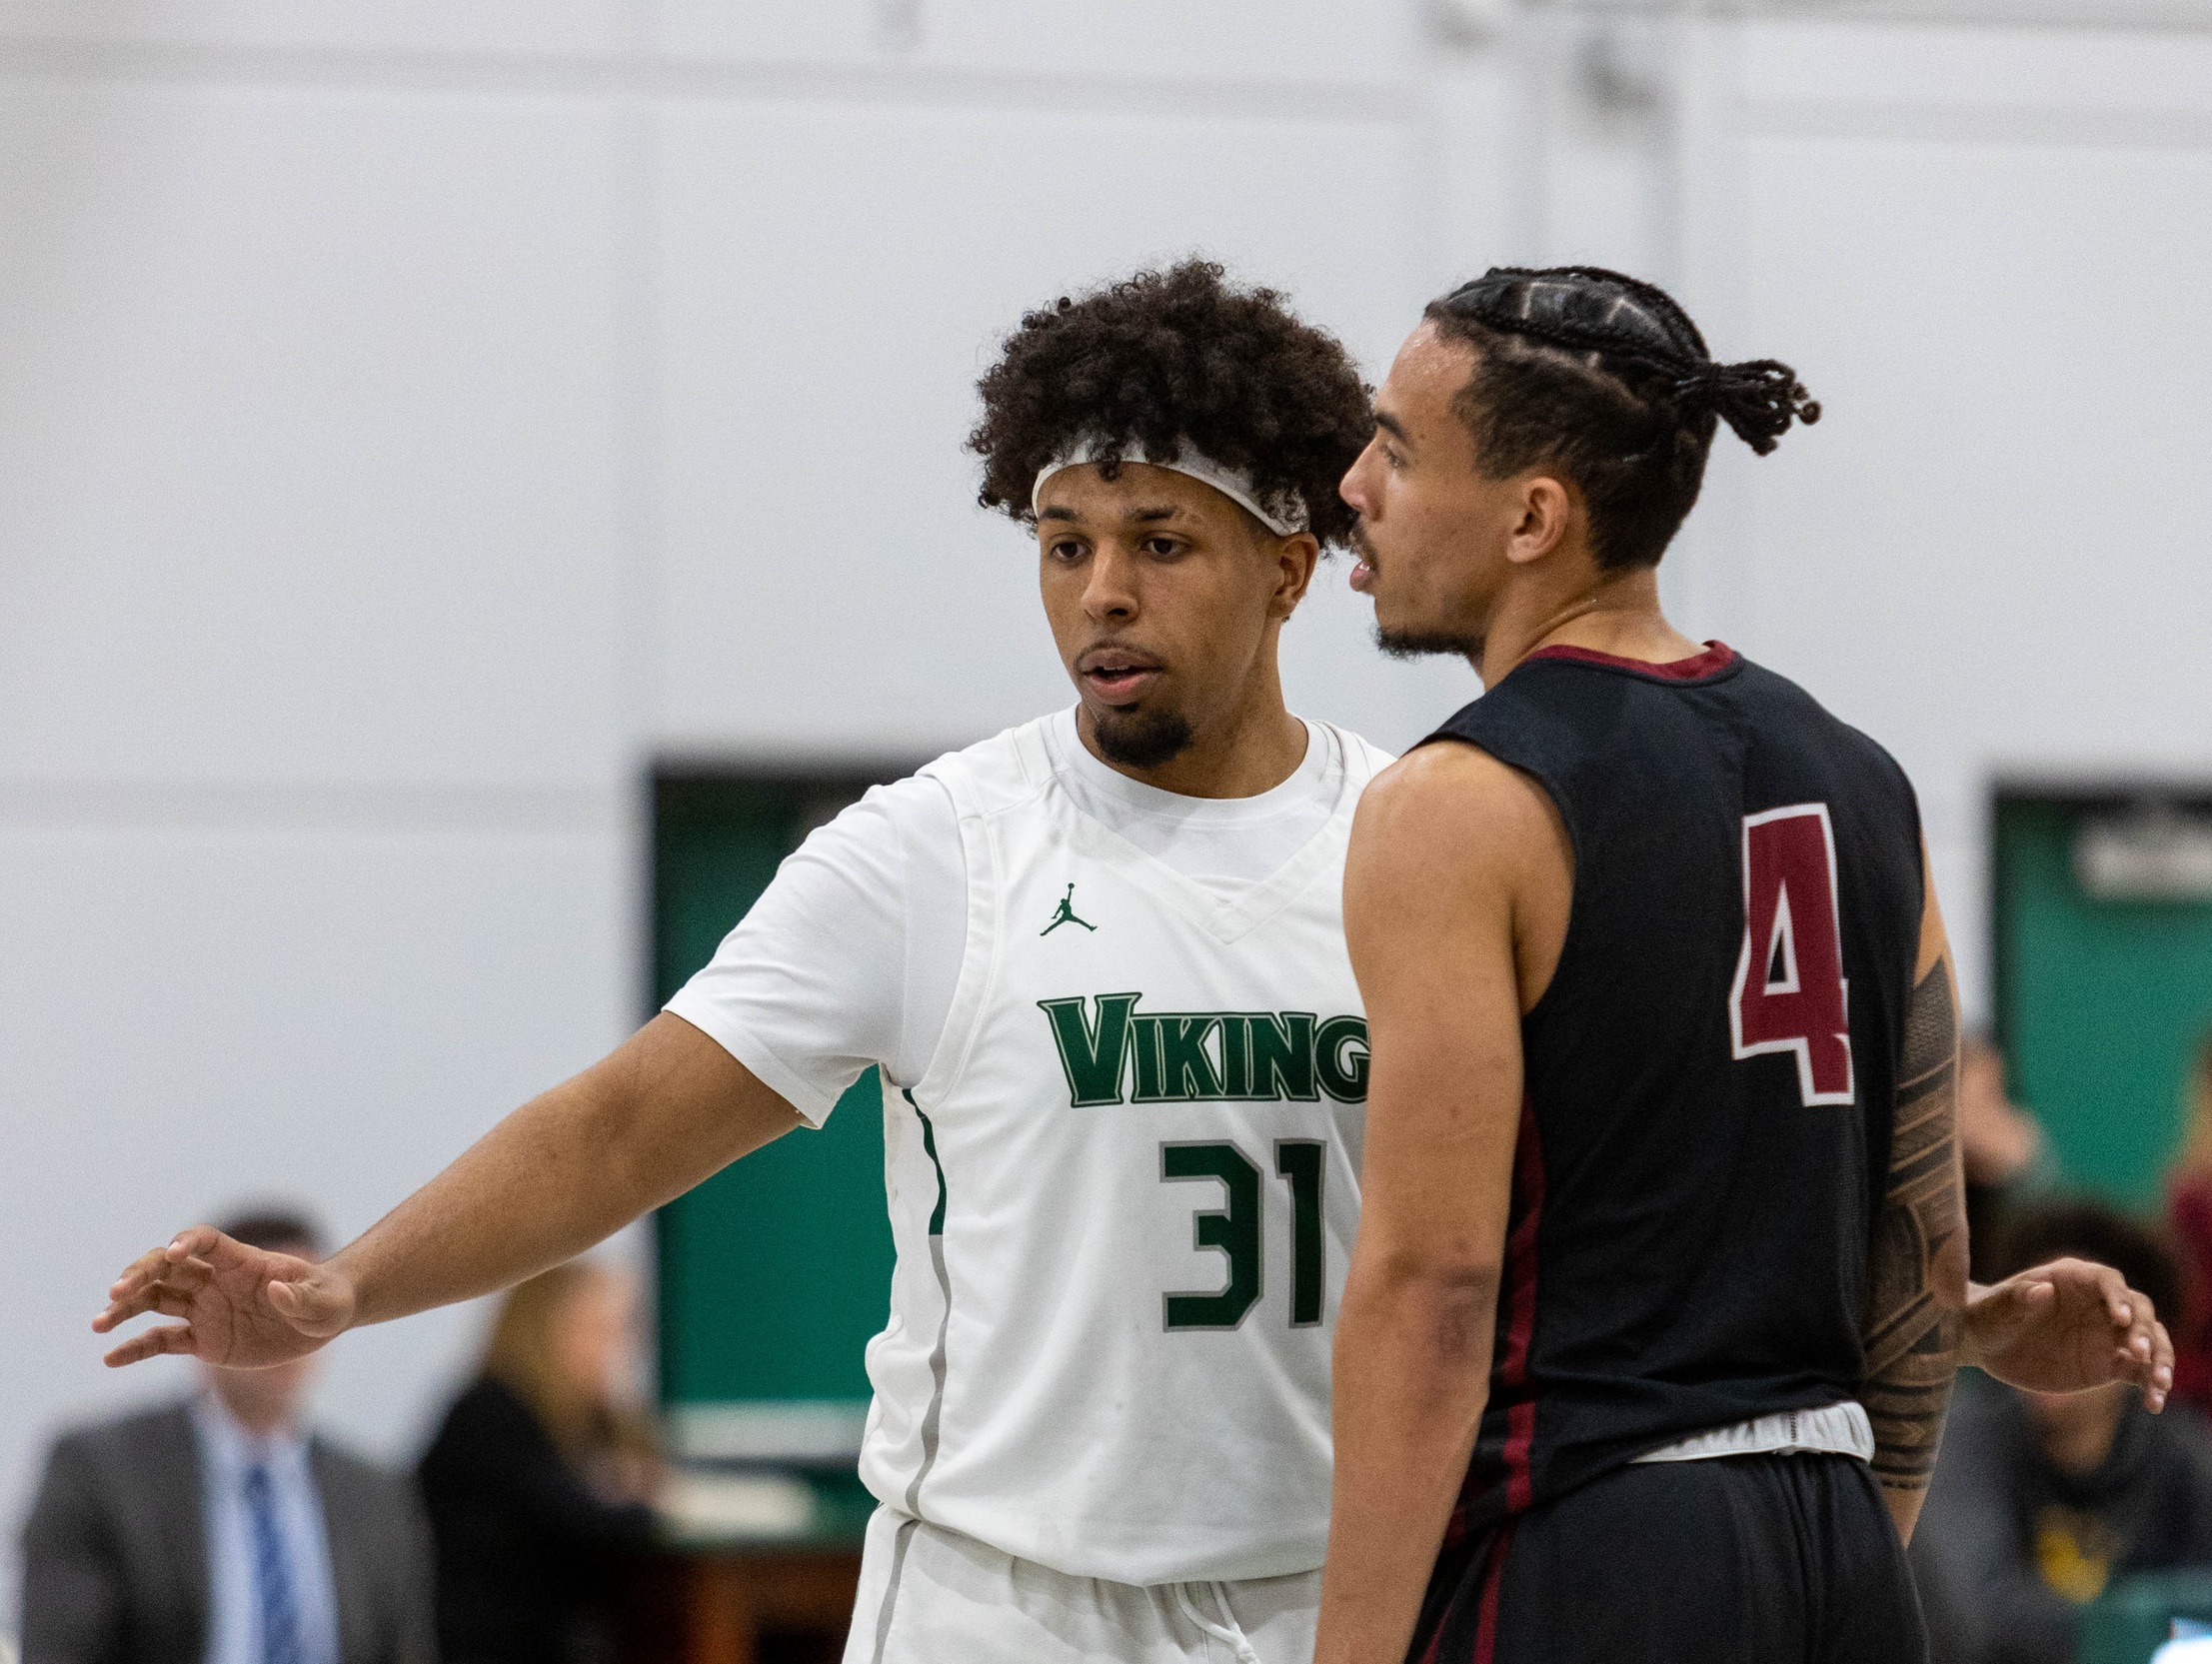 Men's Basketball drops two games this week with losses to San Jose City and West Hills